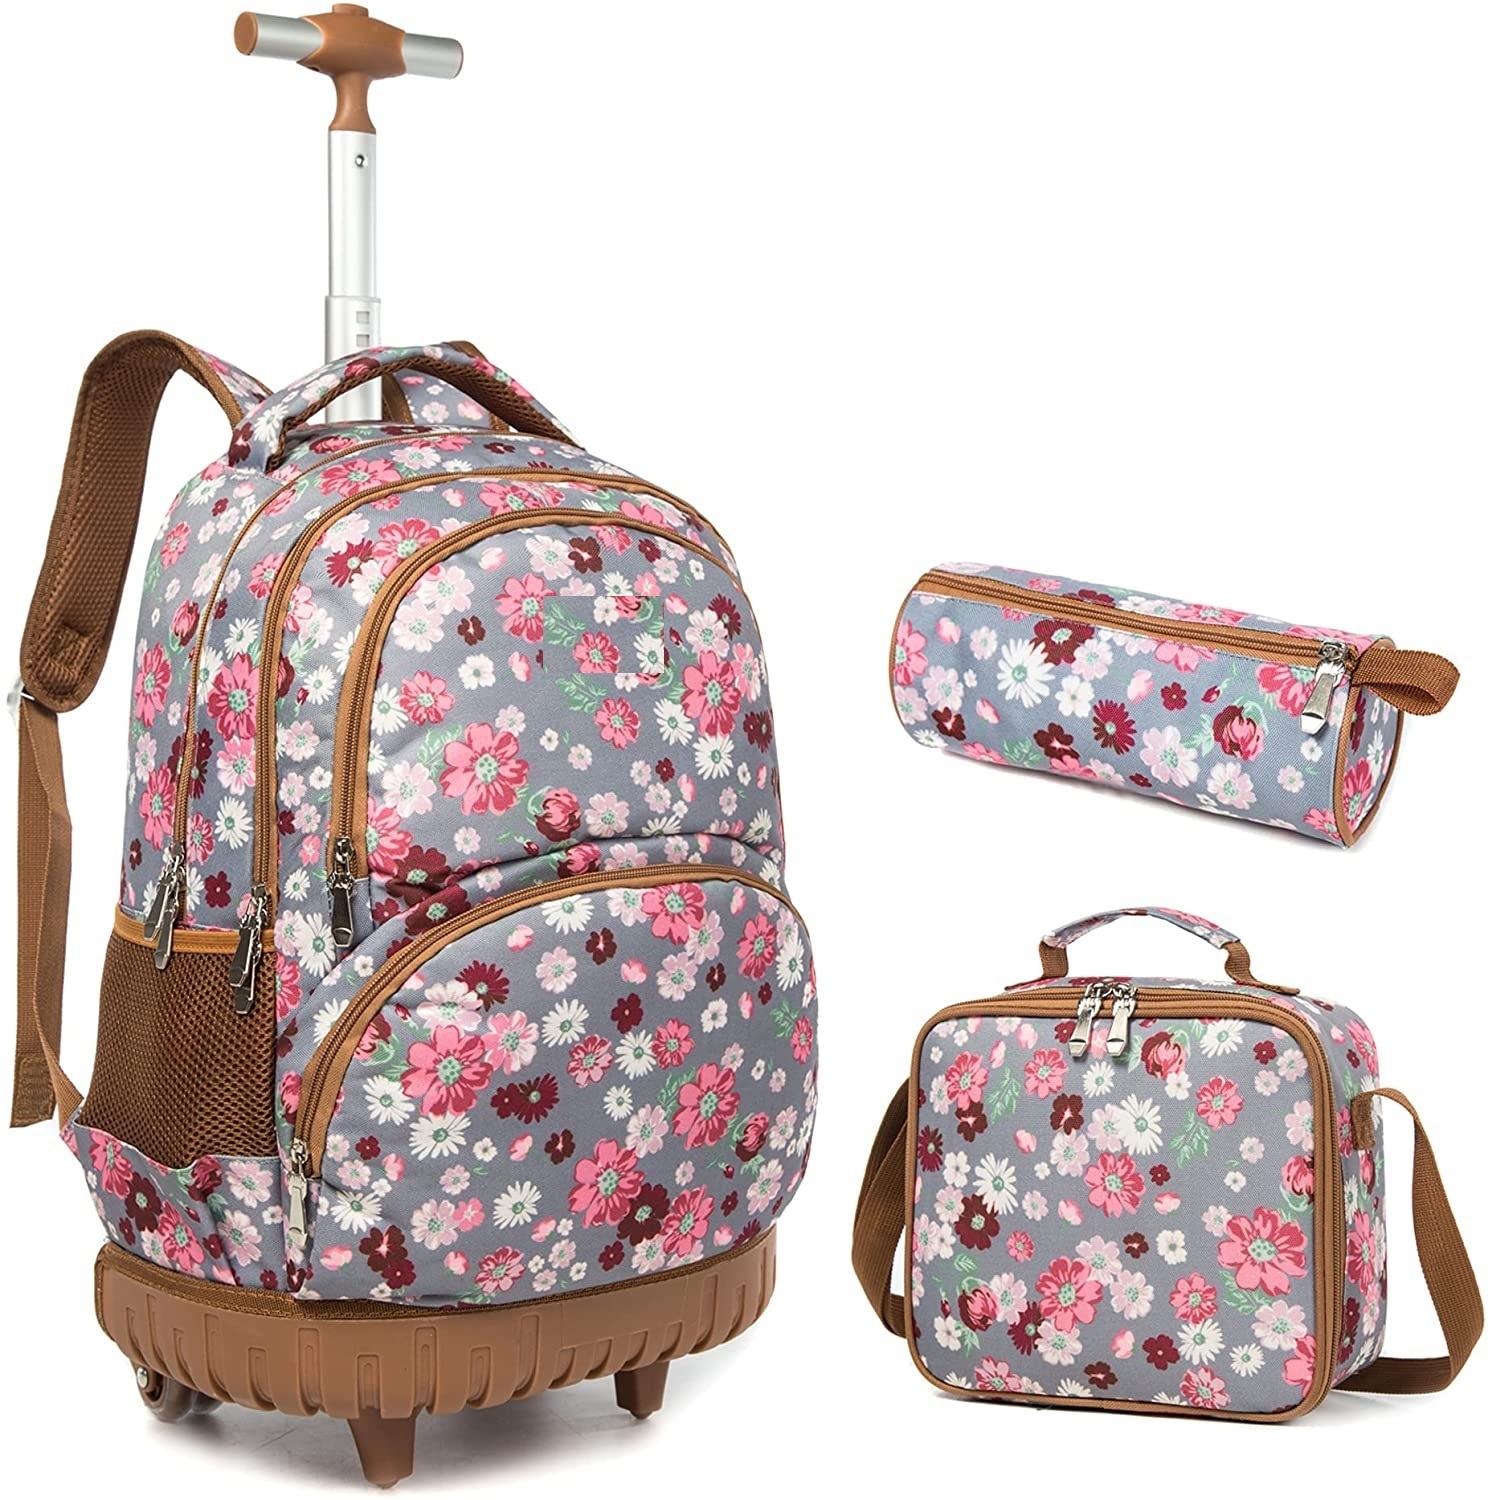 Floral Girl Backpack with Wheels